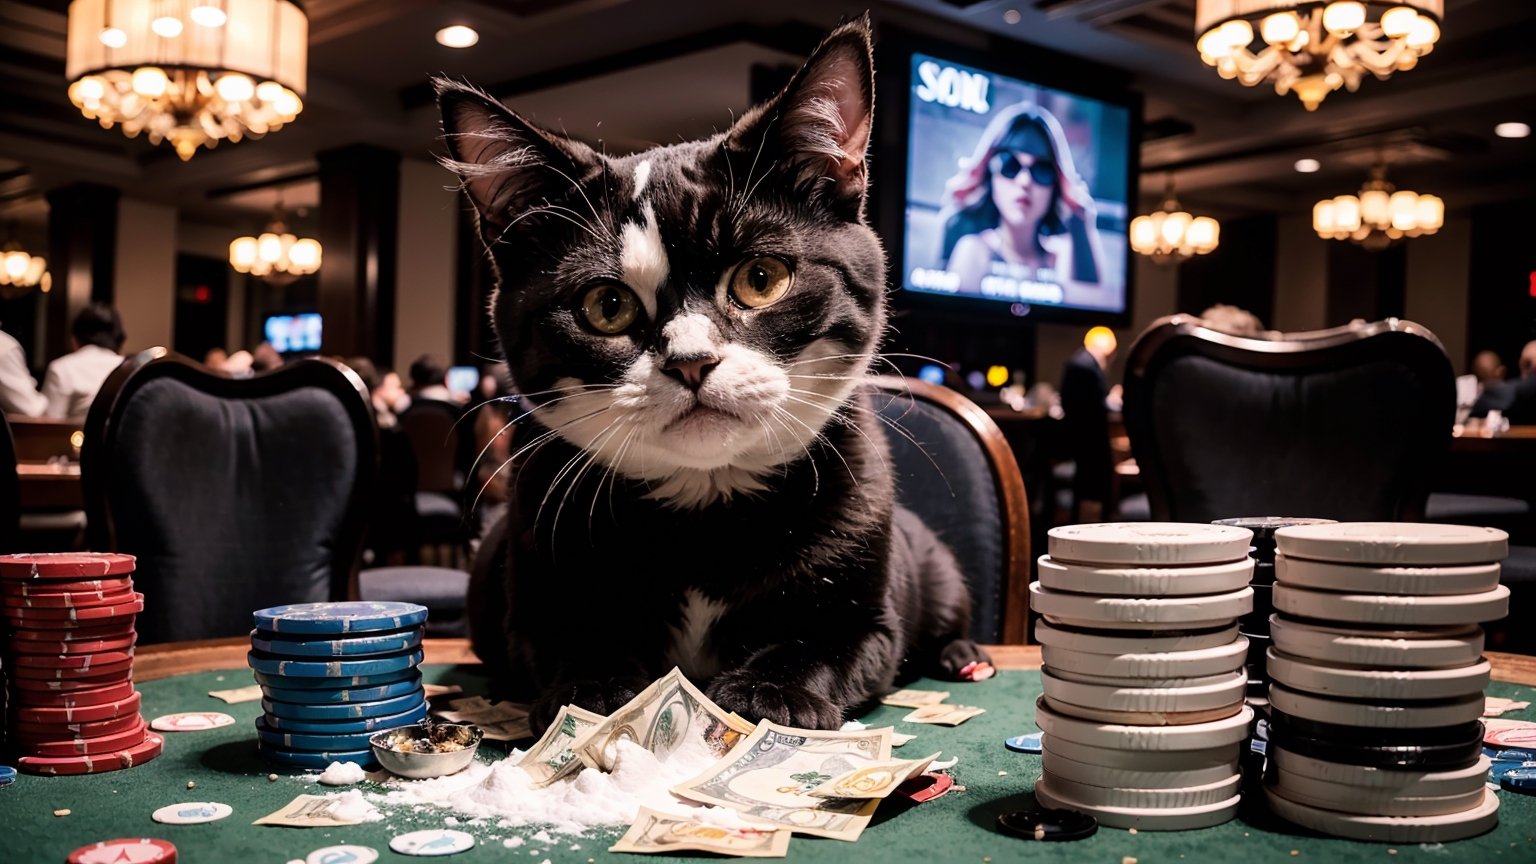 Envision an adorable and playful scene: 1 gray fluffy cat sits in front of a casino table with a lot of White powder on it, there are a lot of dollar bills around, dressed in black sunglasses, ((a lot of White powder on the table)), (((night gangster casino background))), close-up shot